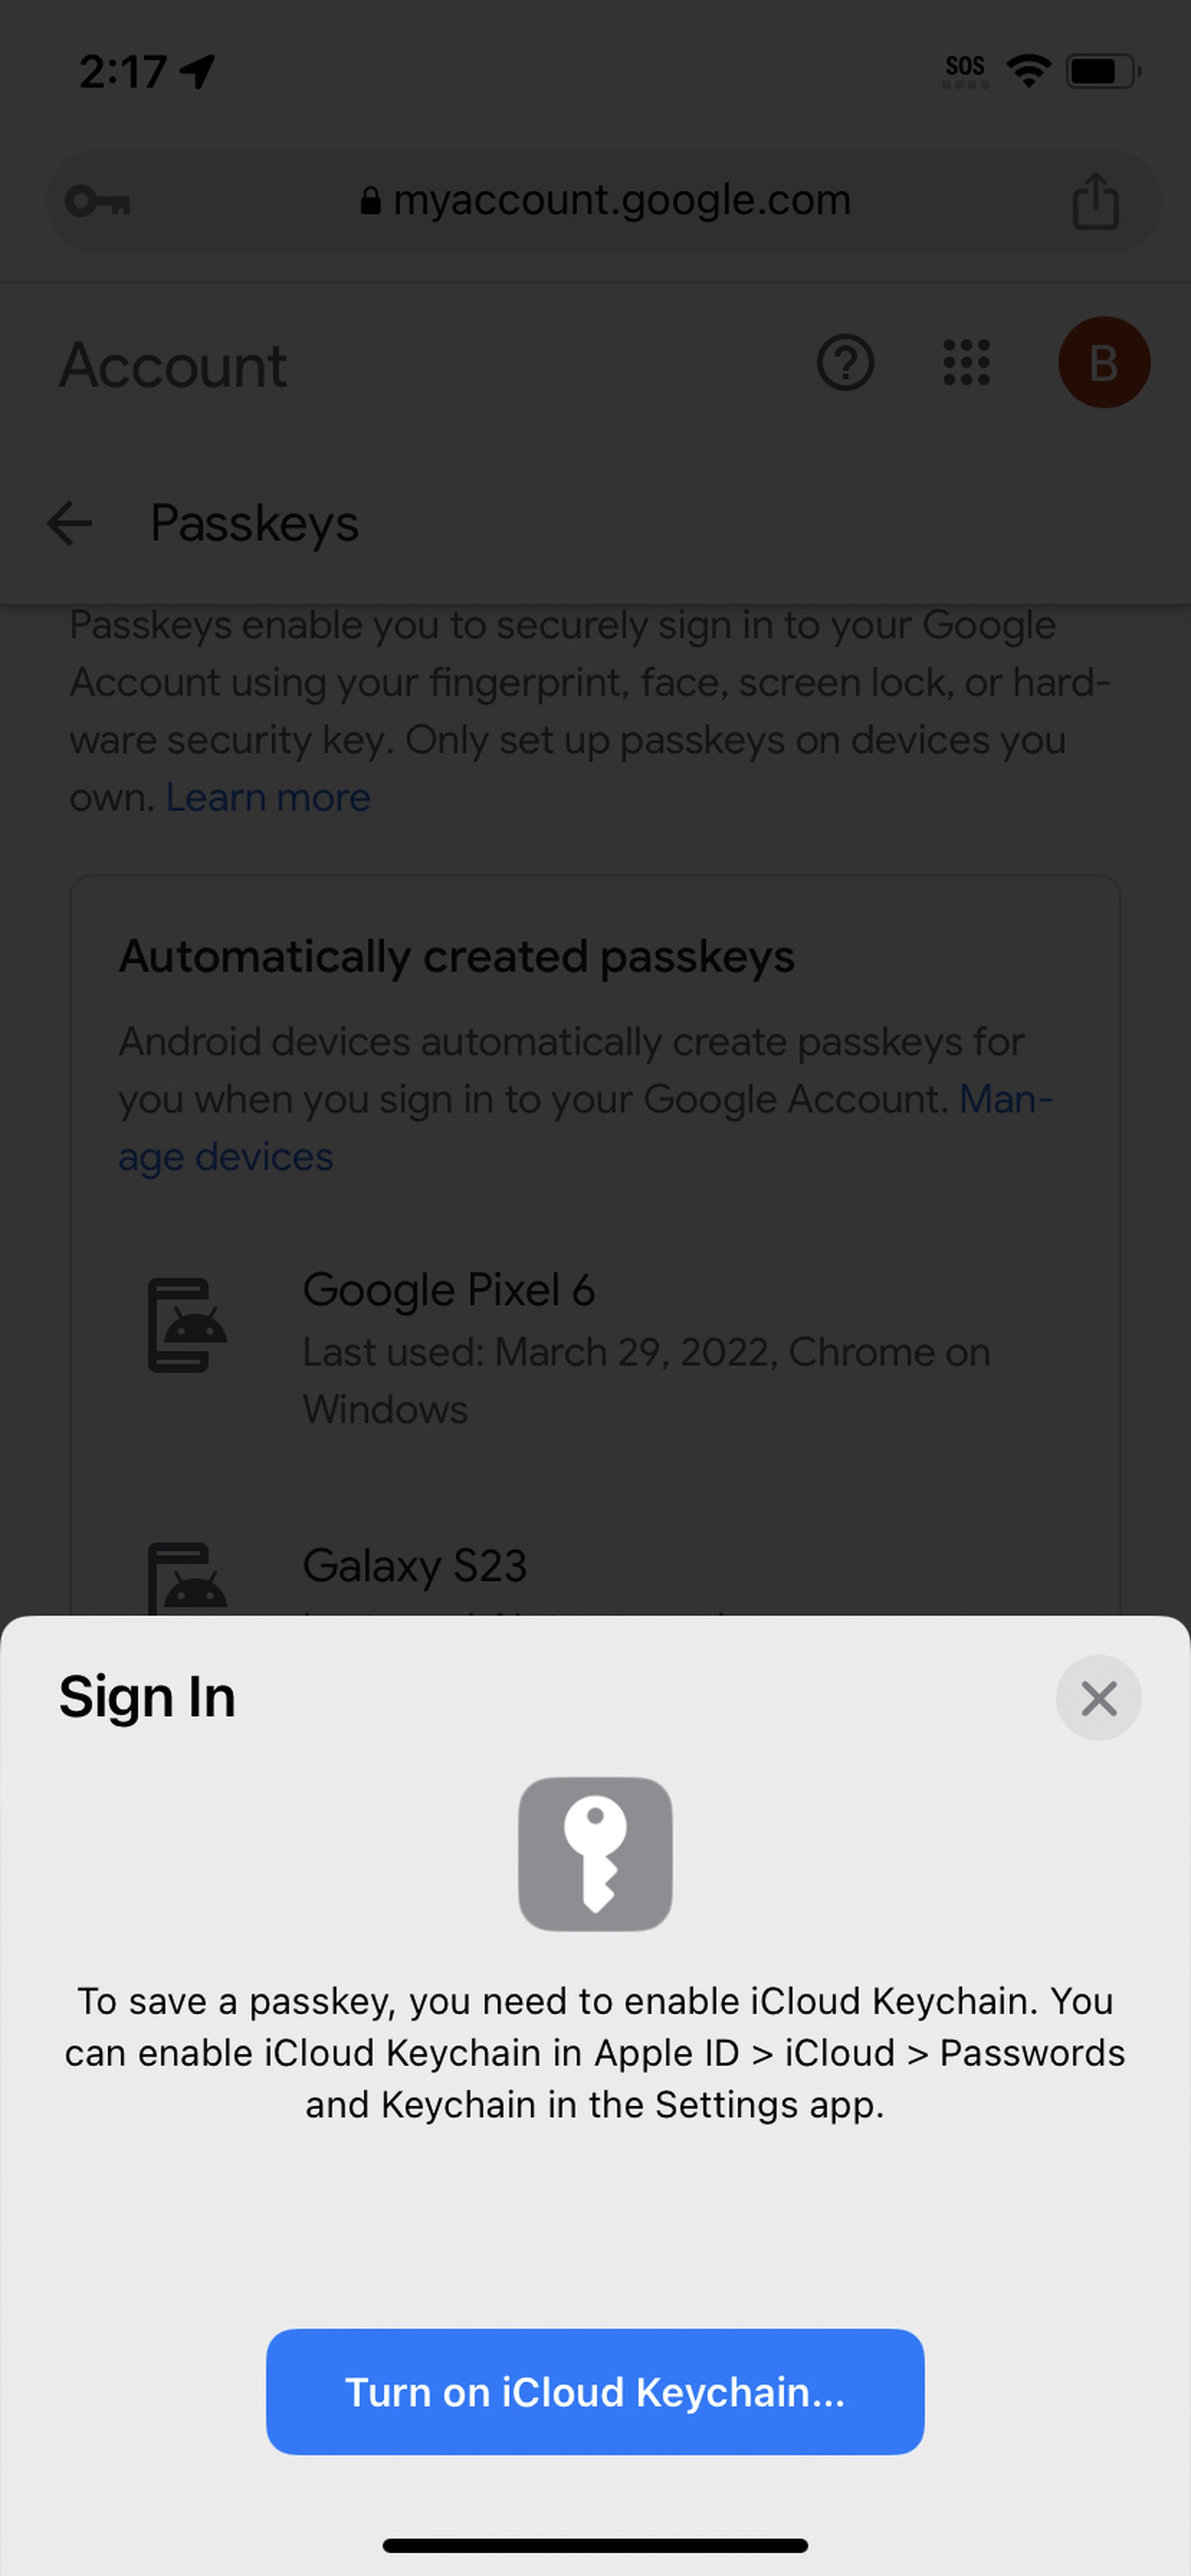 Sign in popup that says “To save a passkey, you need to enable iCloud Keychain.”